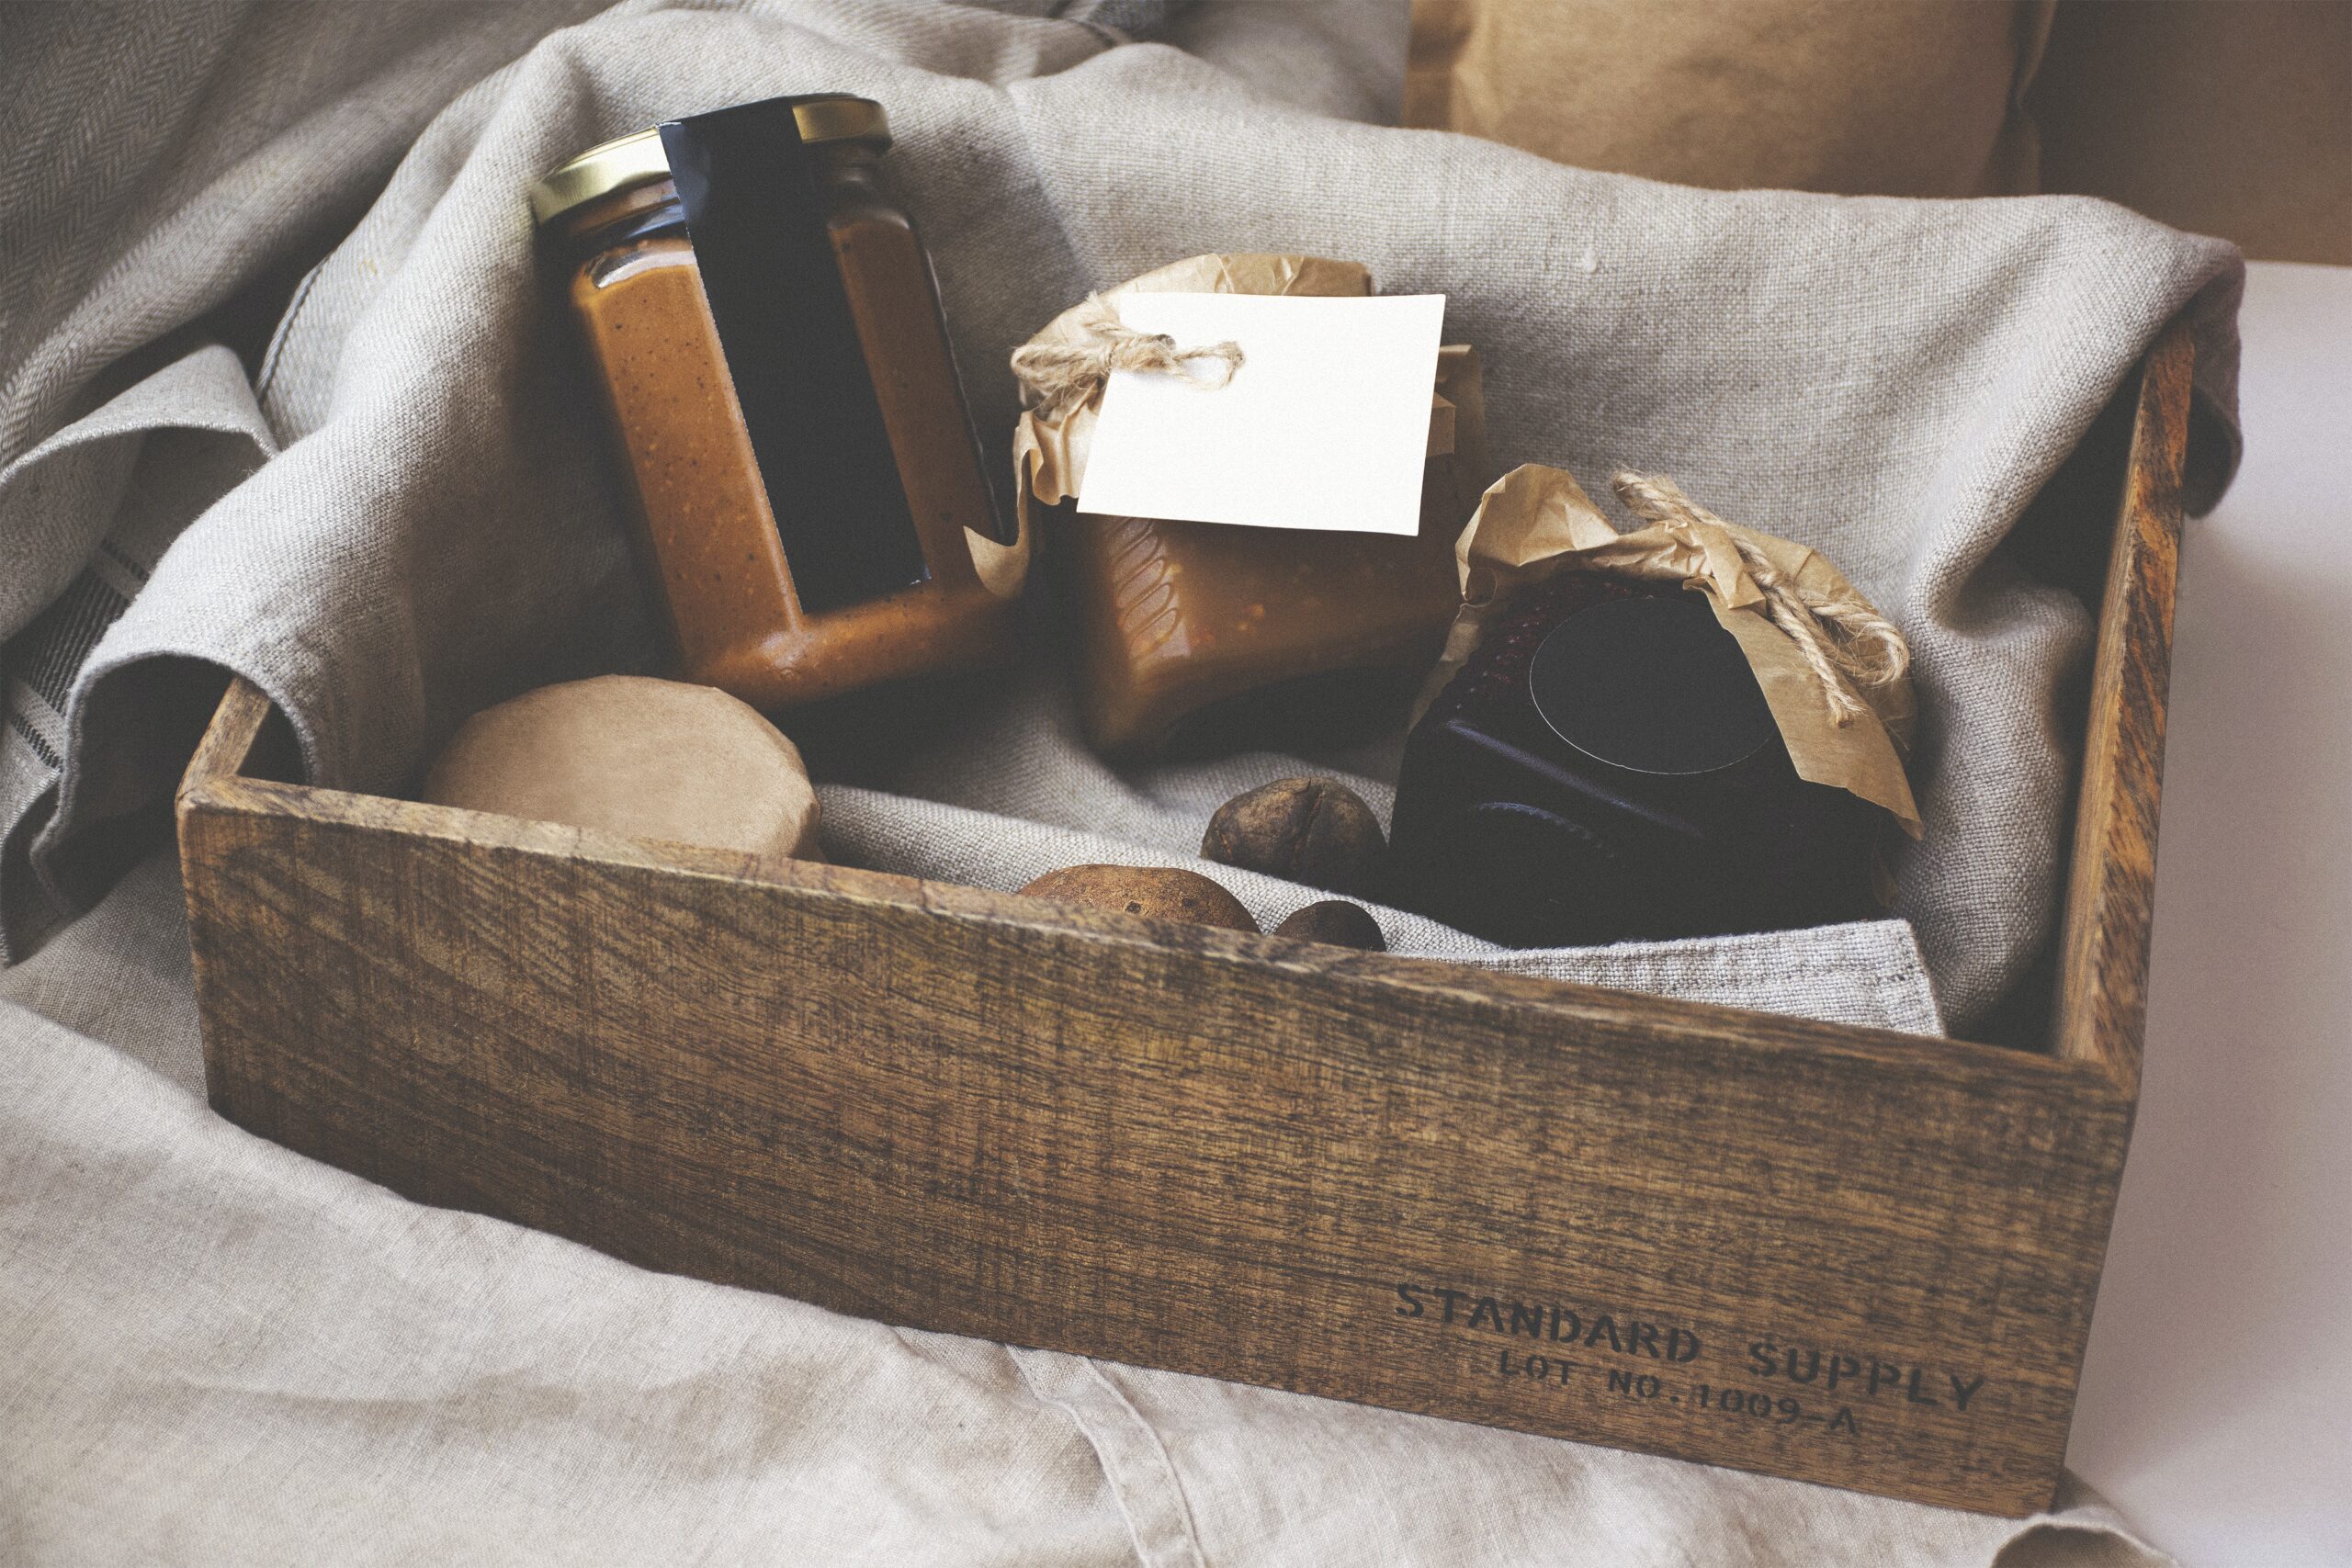 How To Make A Gift Basket: A Step-by-Step Guide